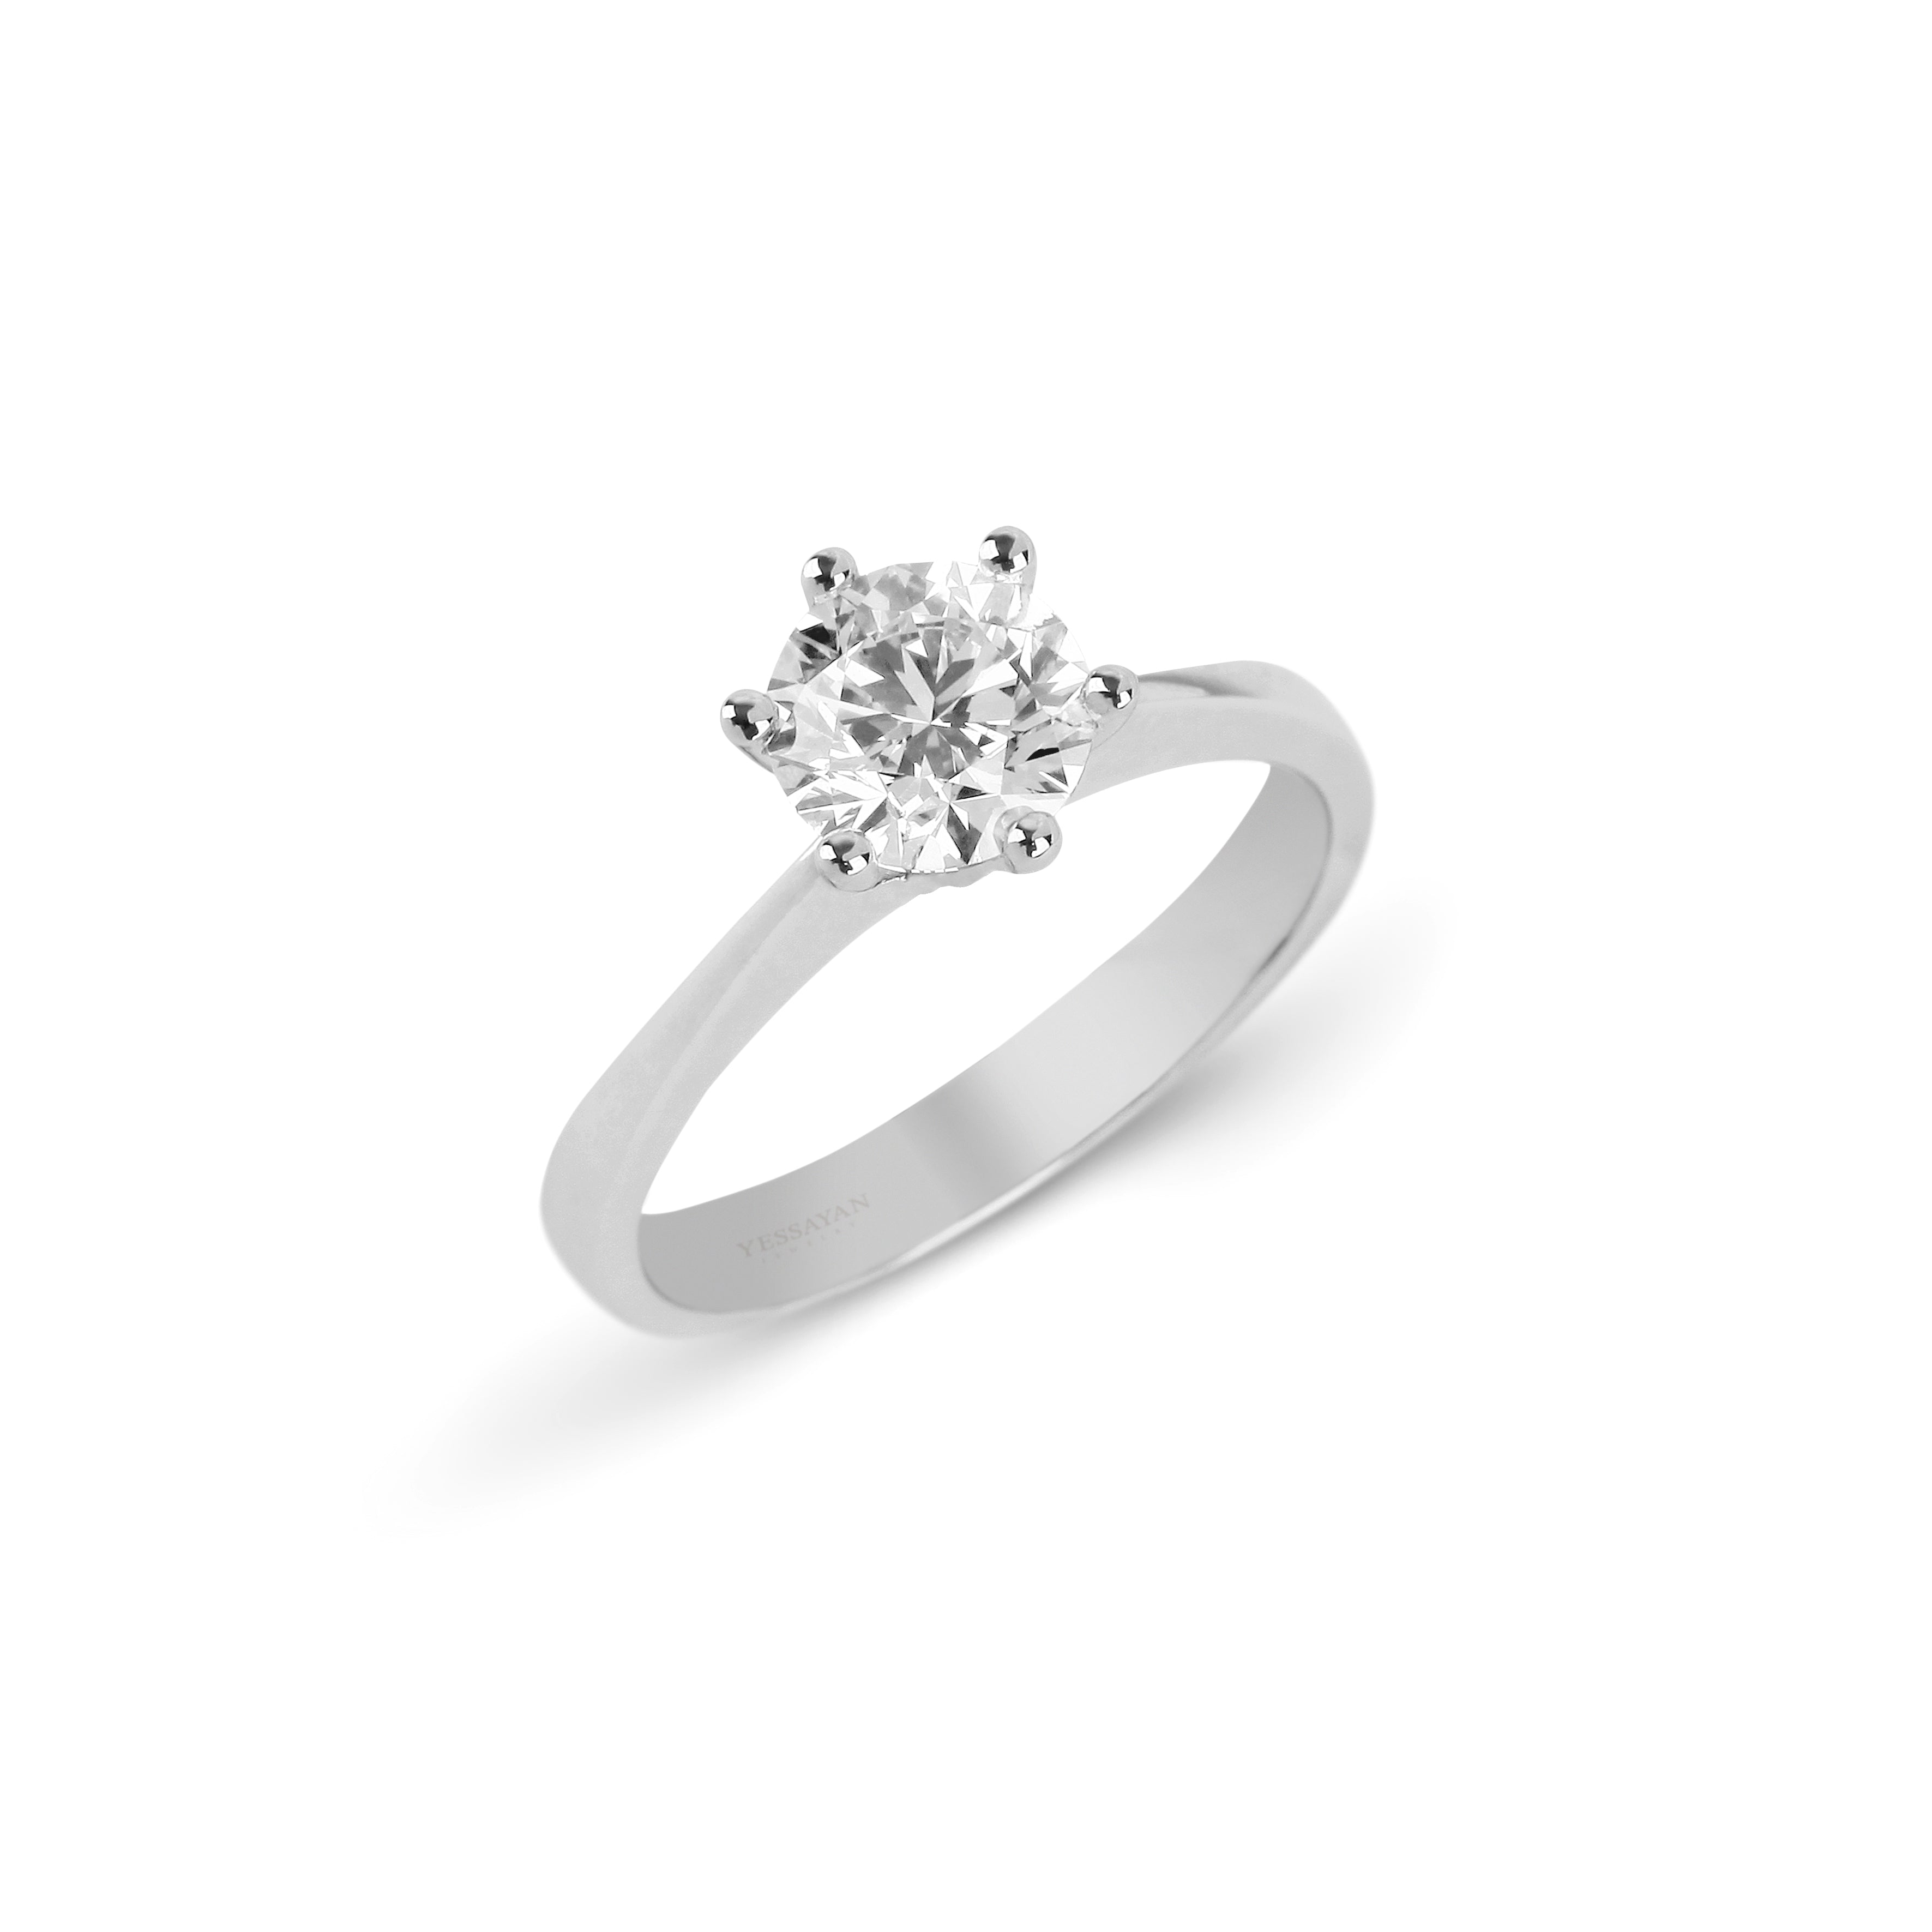 Certified Solitaire Diamond Ring | diamond solitaire ring